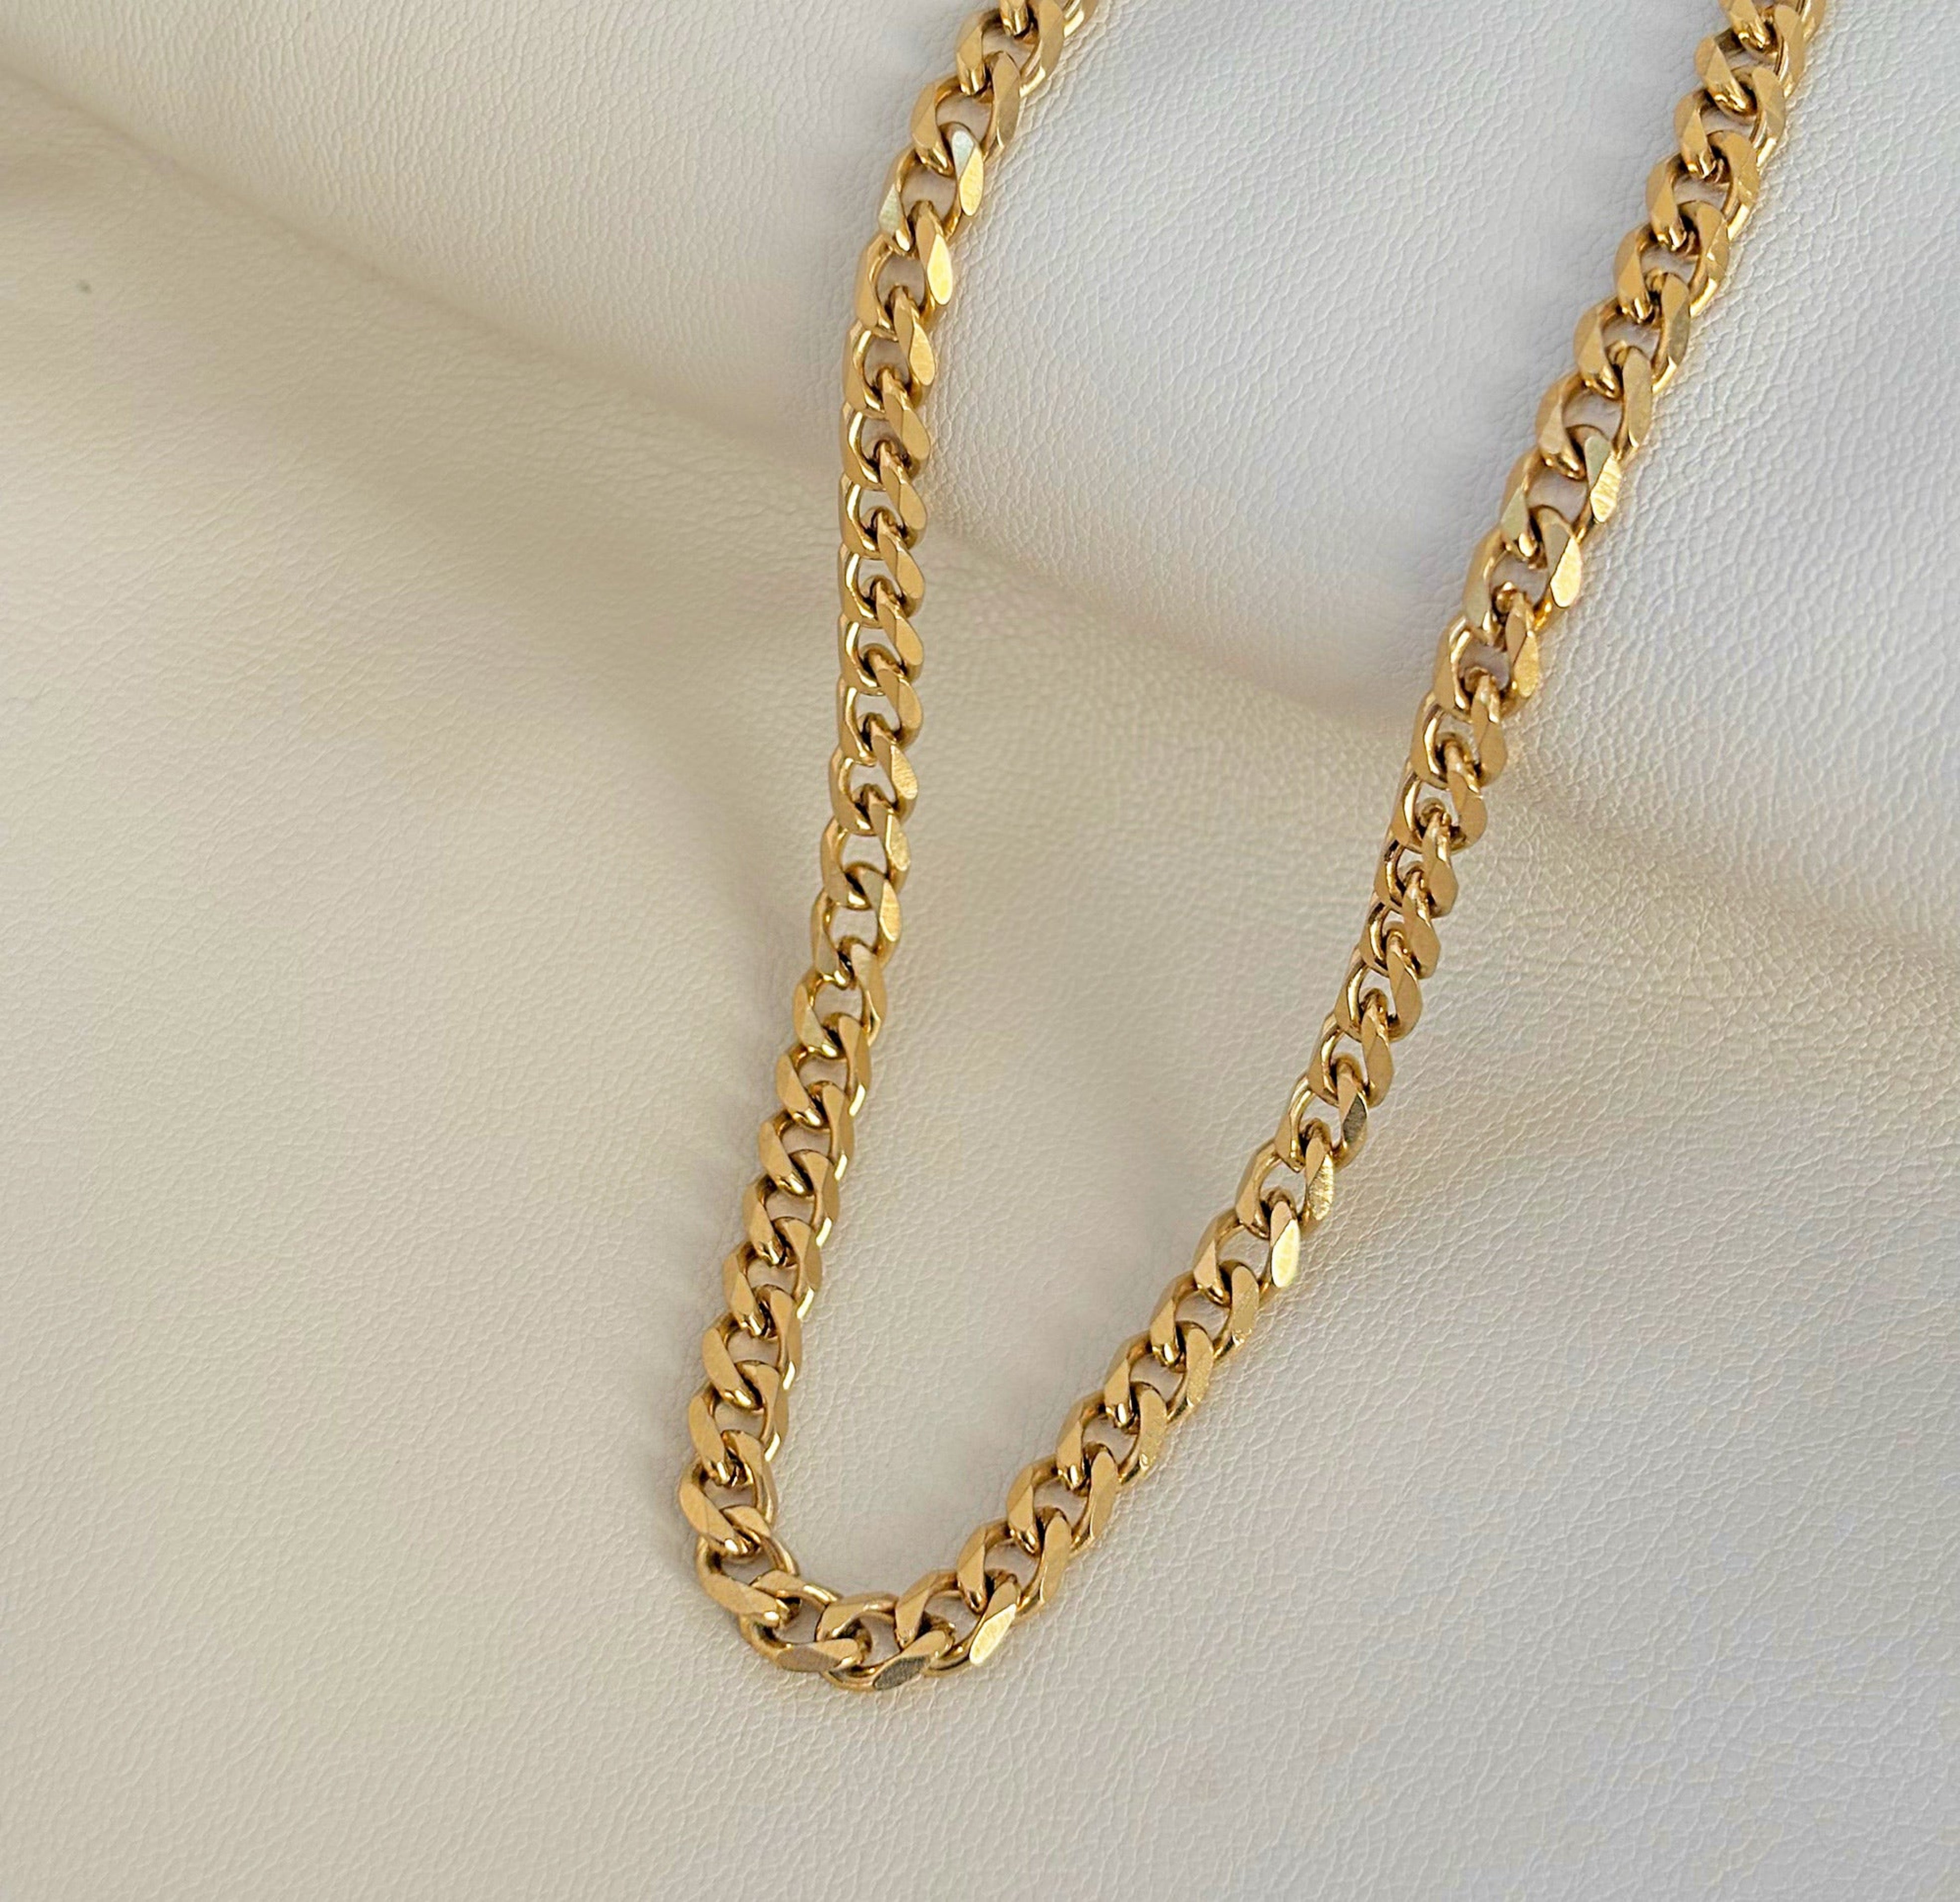 gold curb chain necklace waterproof jewelry